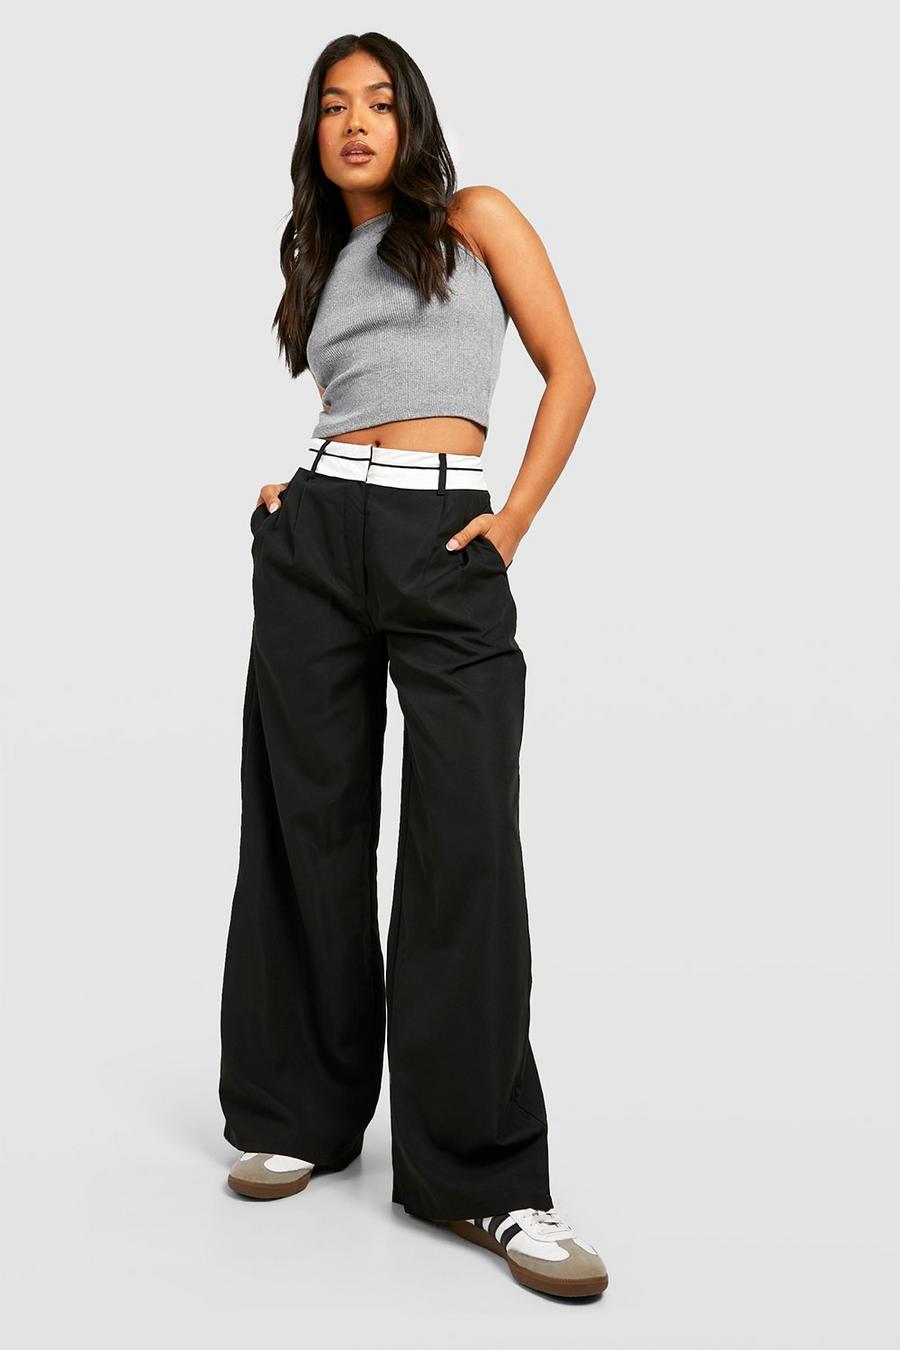 New PETITE Women HIGH Waist RIBBED Elasticated WIDE LEG Stretch LADIES  Trousers